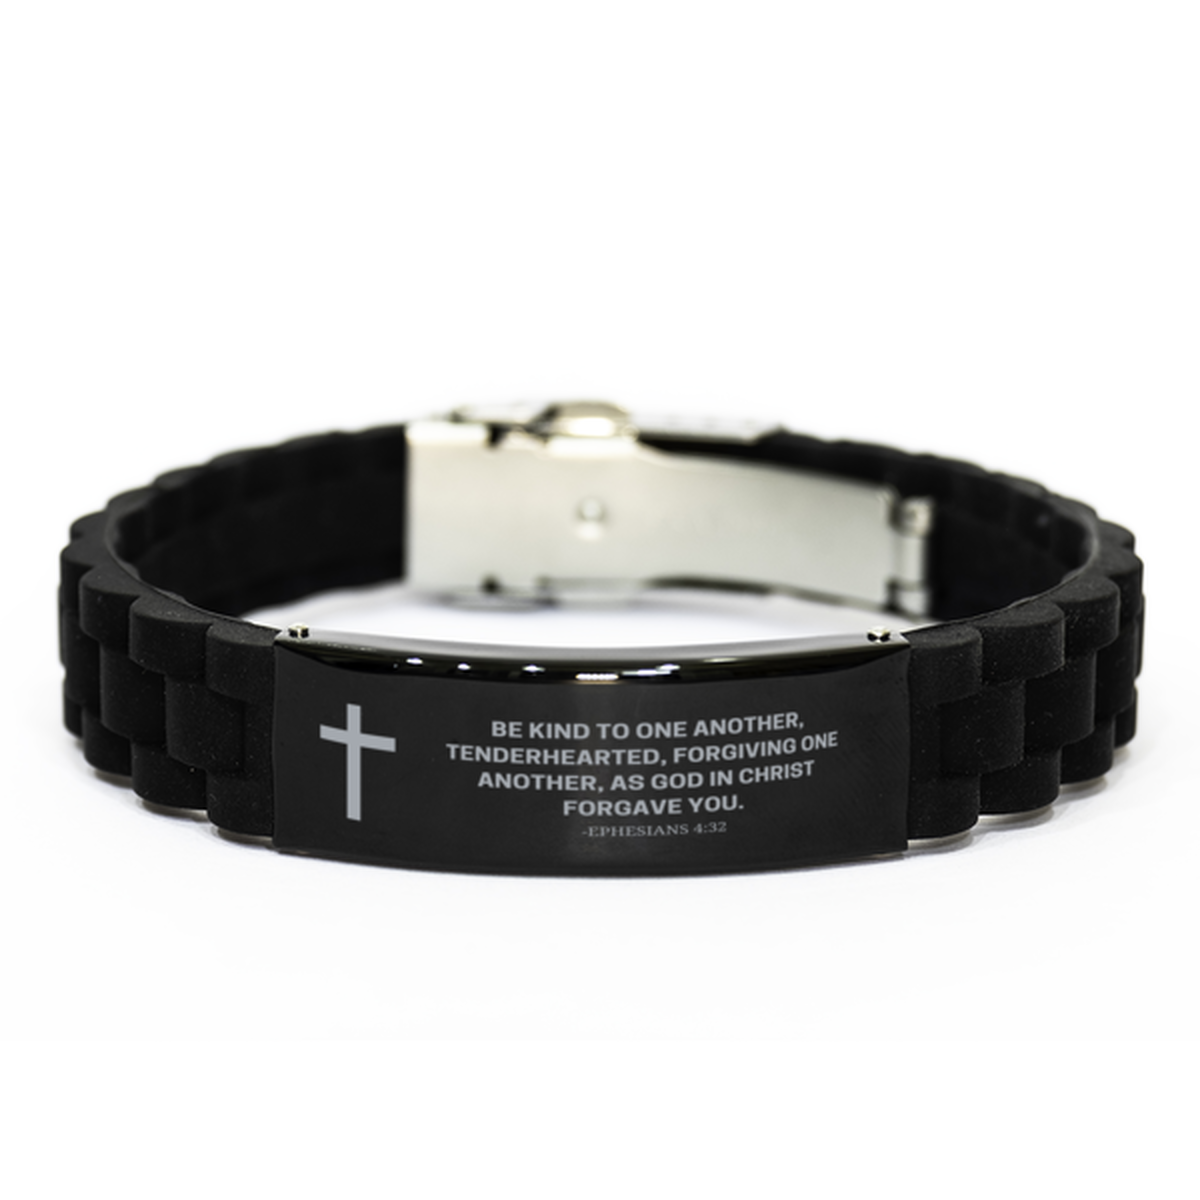 Baptism Gifts For Teenage Boys Girls, Christian Bible Verse Black Glidelock Clasp Bracelet, Be kind to one another, Catholic Confirmation Gifts for Son, Godson, Grandson, Nephew